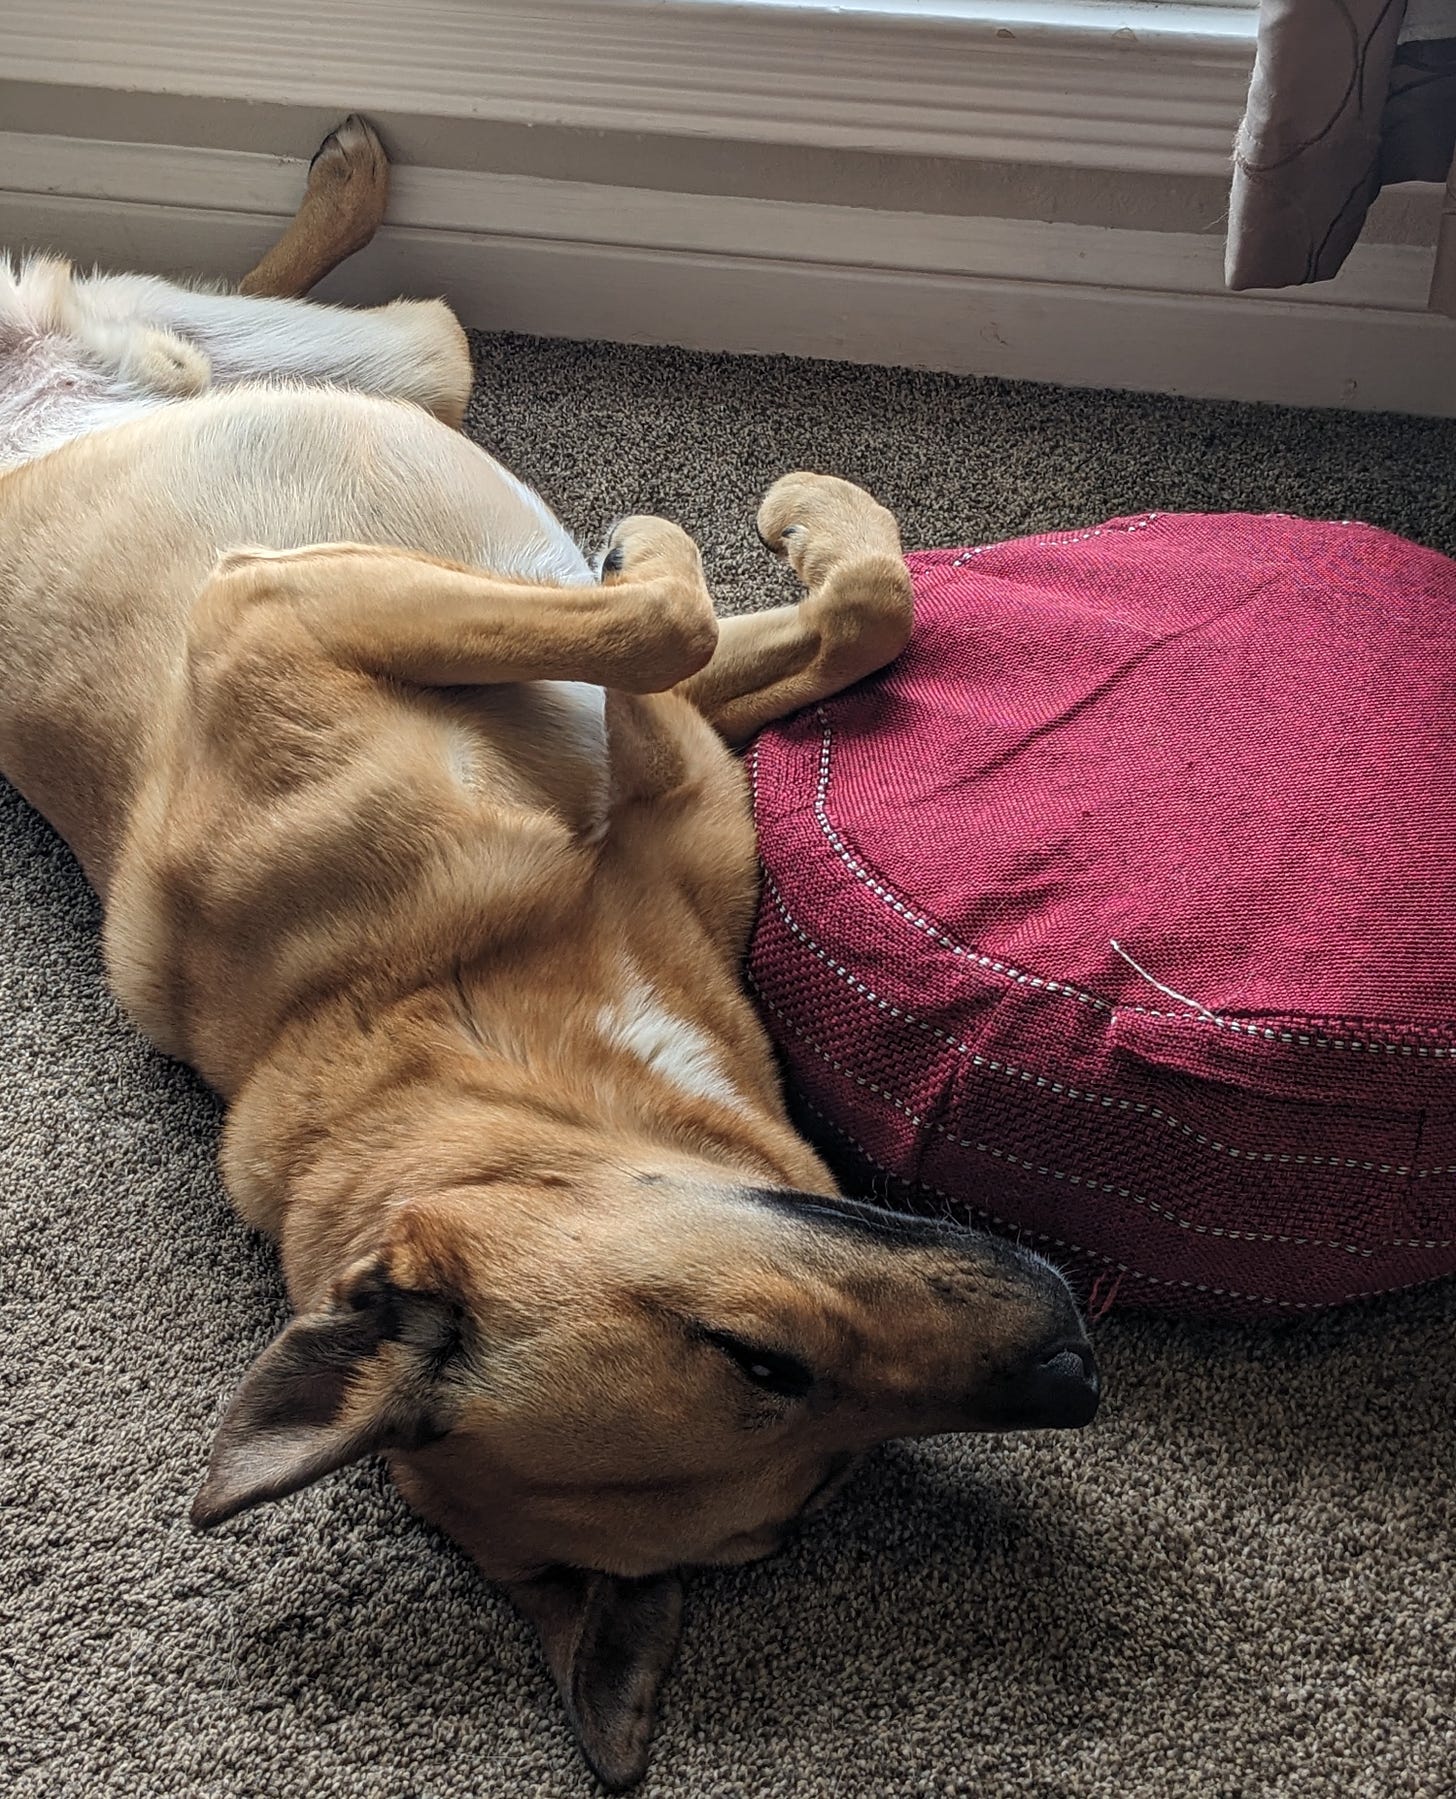 My dog laying upside down just next to my meditation cushion